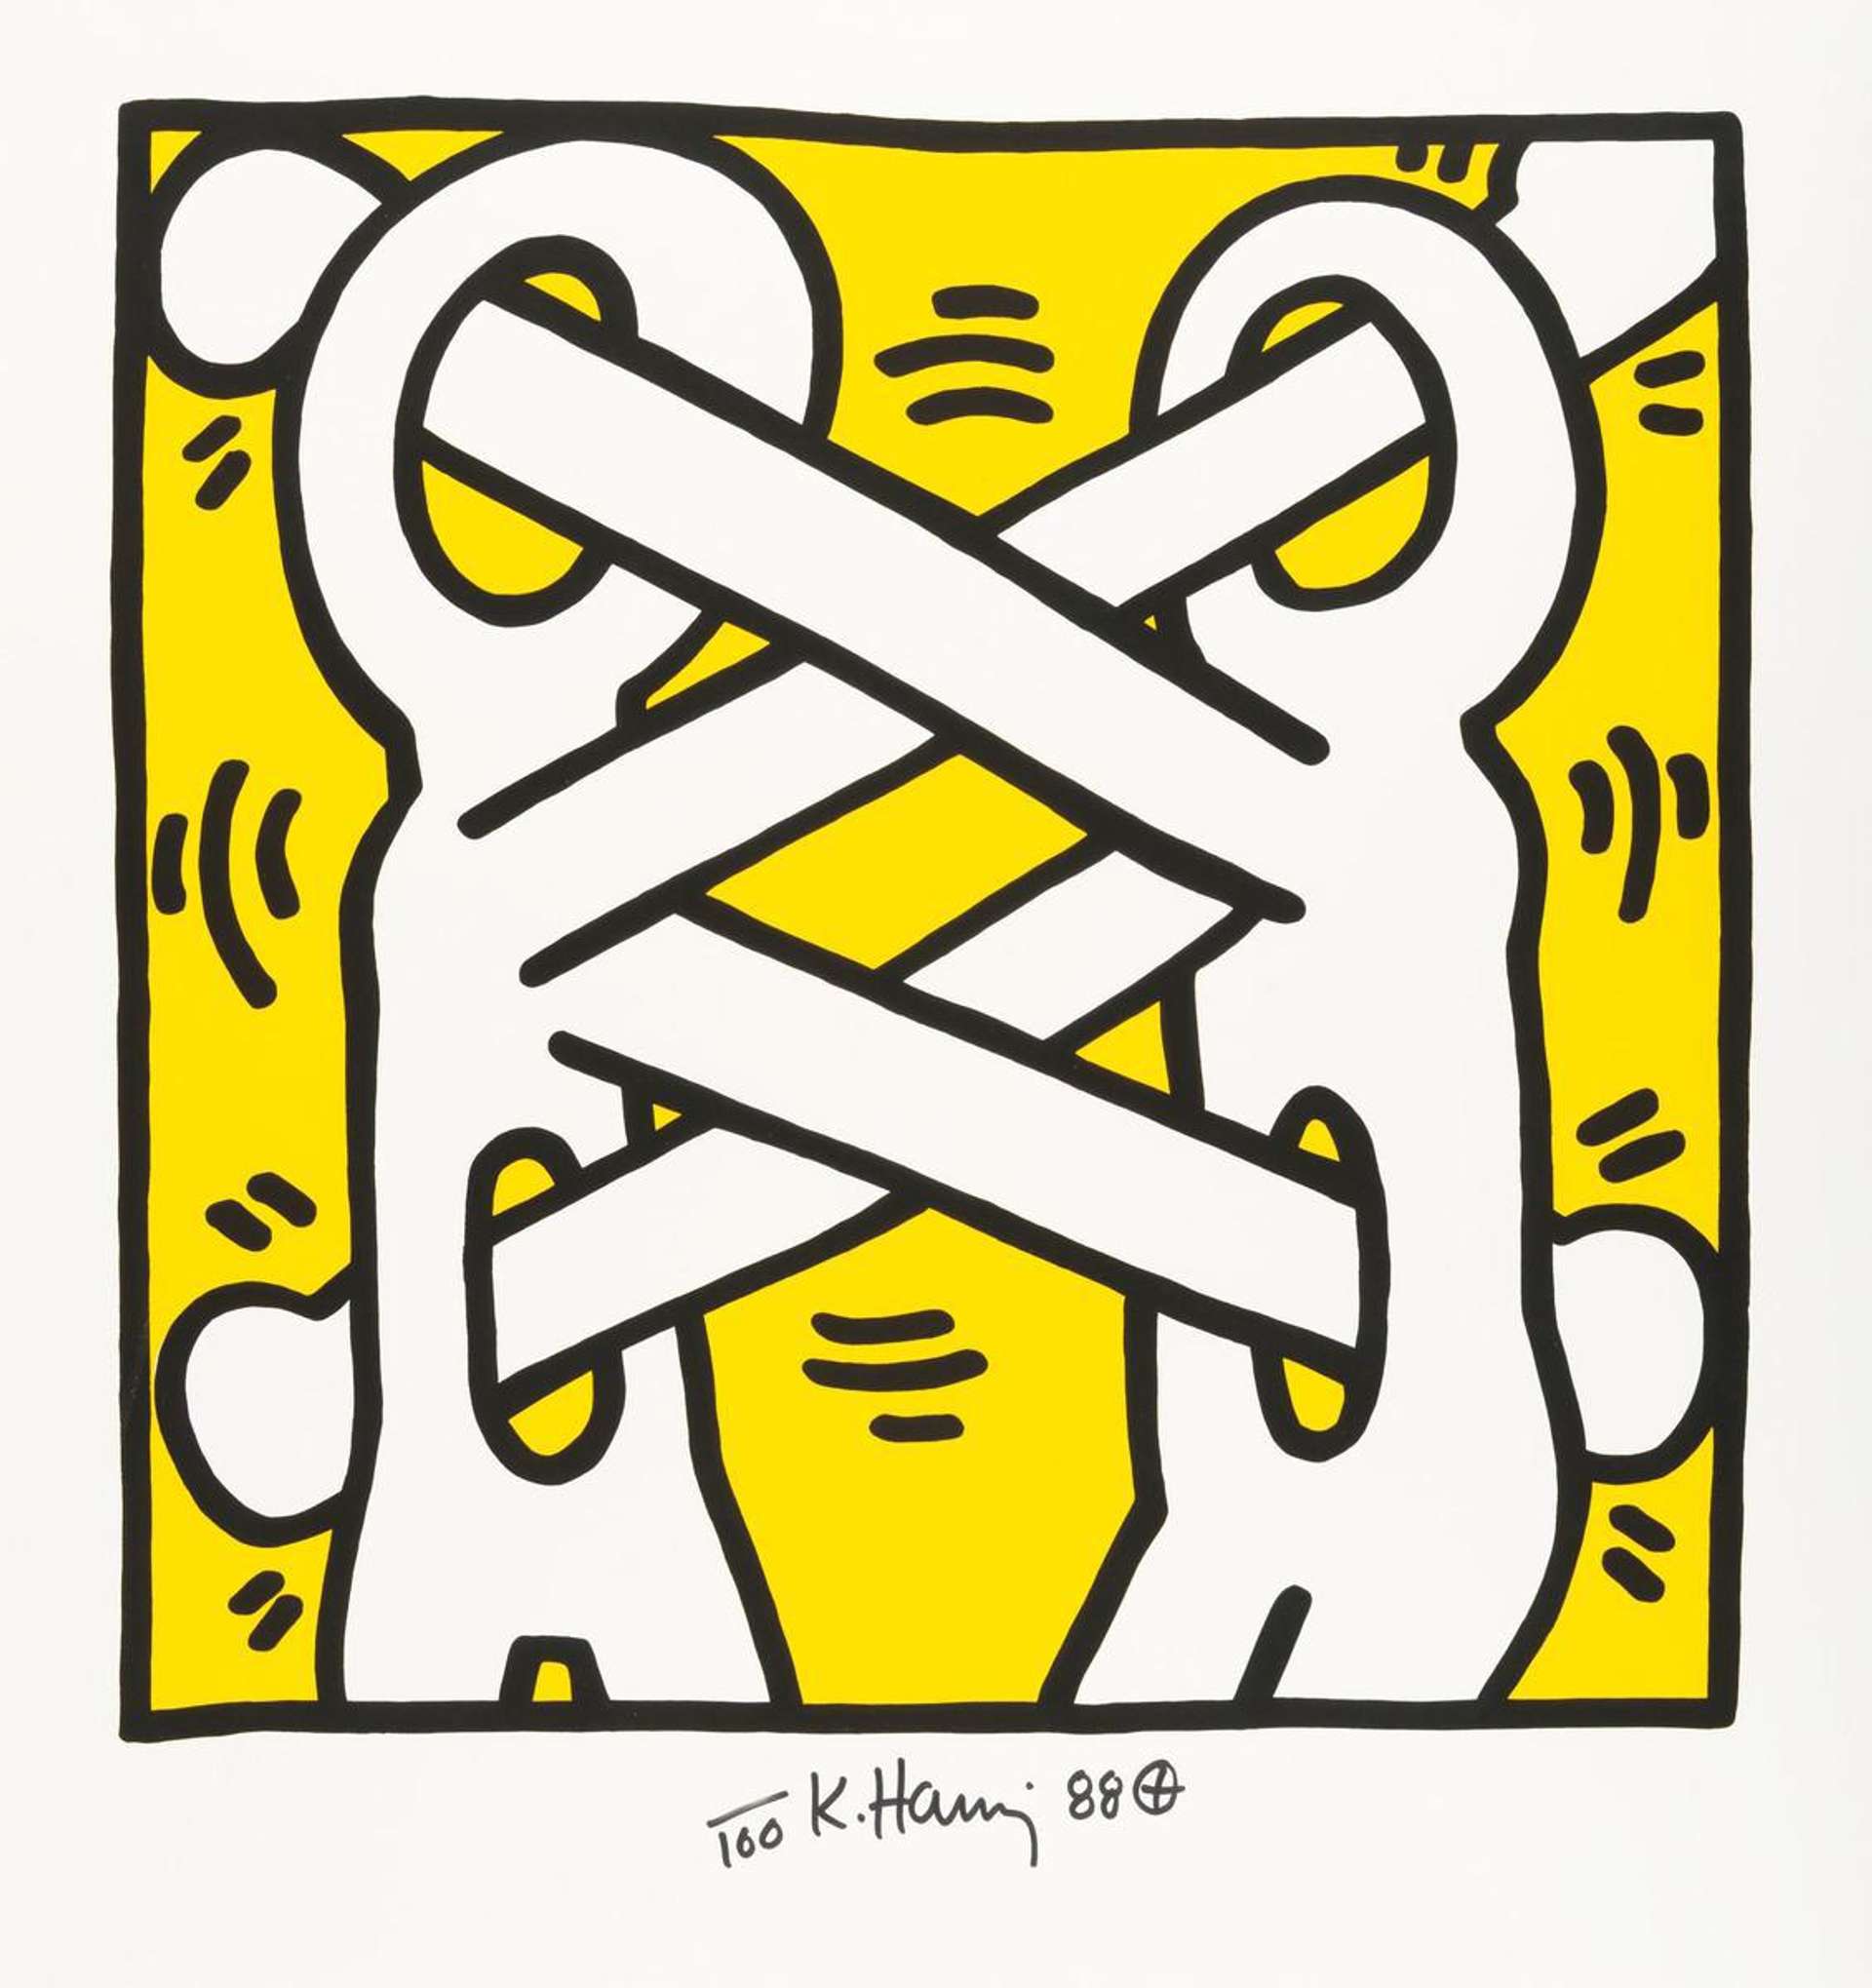 Keith Haring: Art Attack On Aids (yellow) - Signed Print